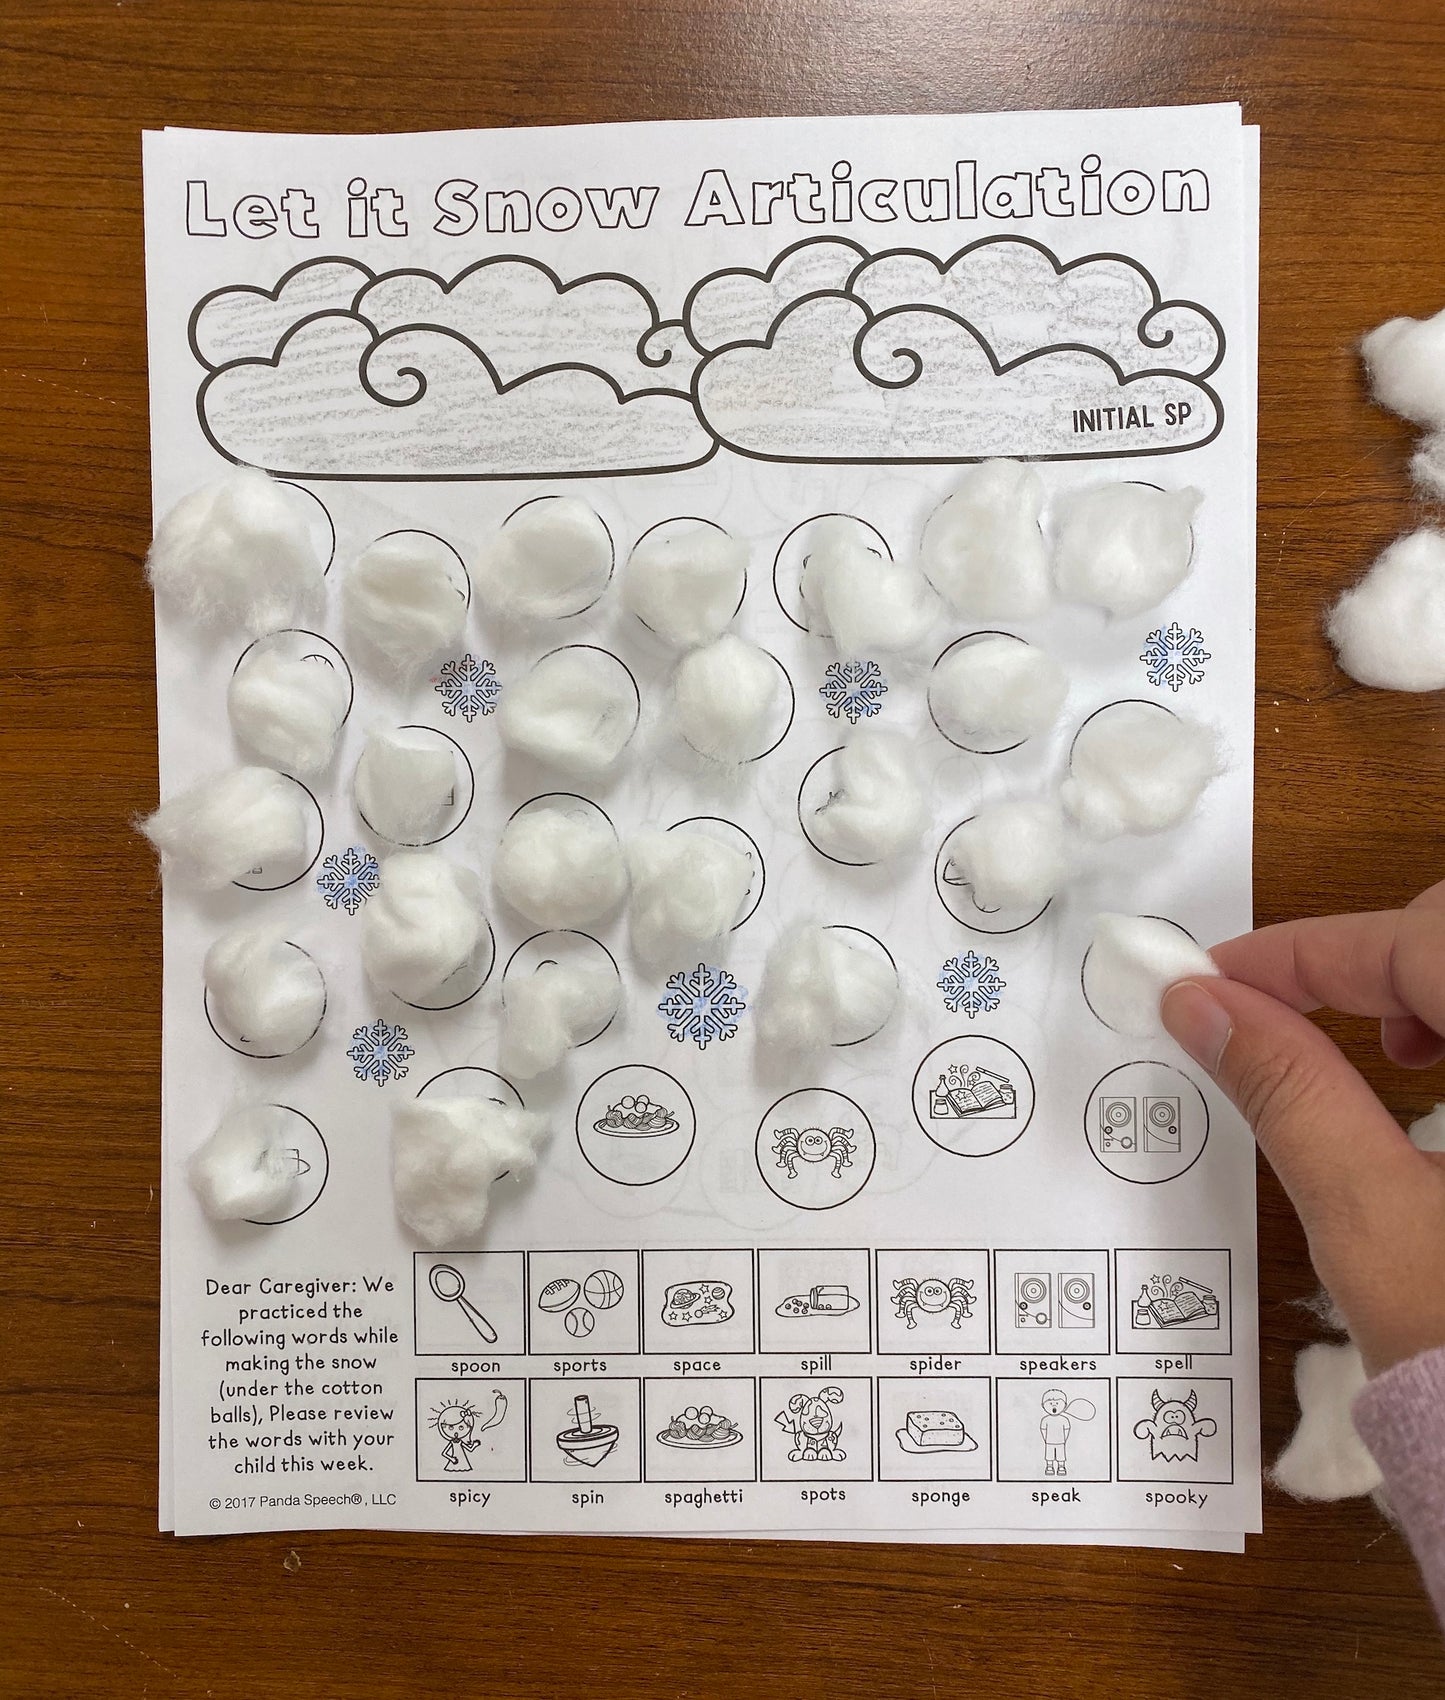 Let it Snow! Articulation and Language! Speech Therapy Cotton Ball craft (Sheep)